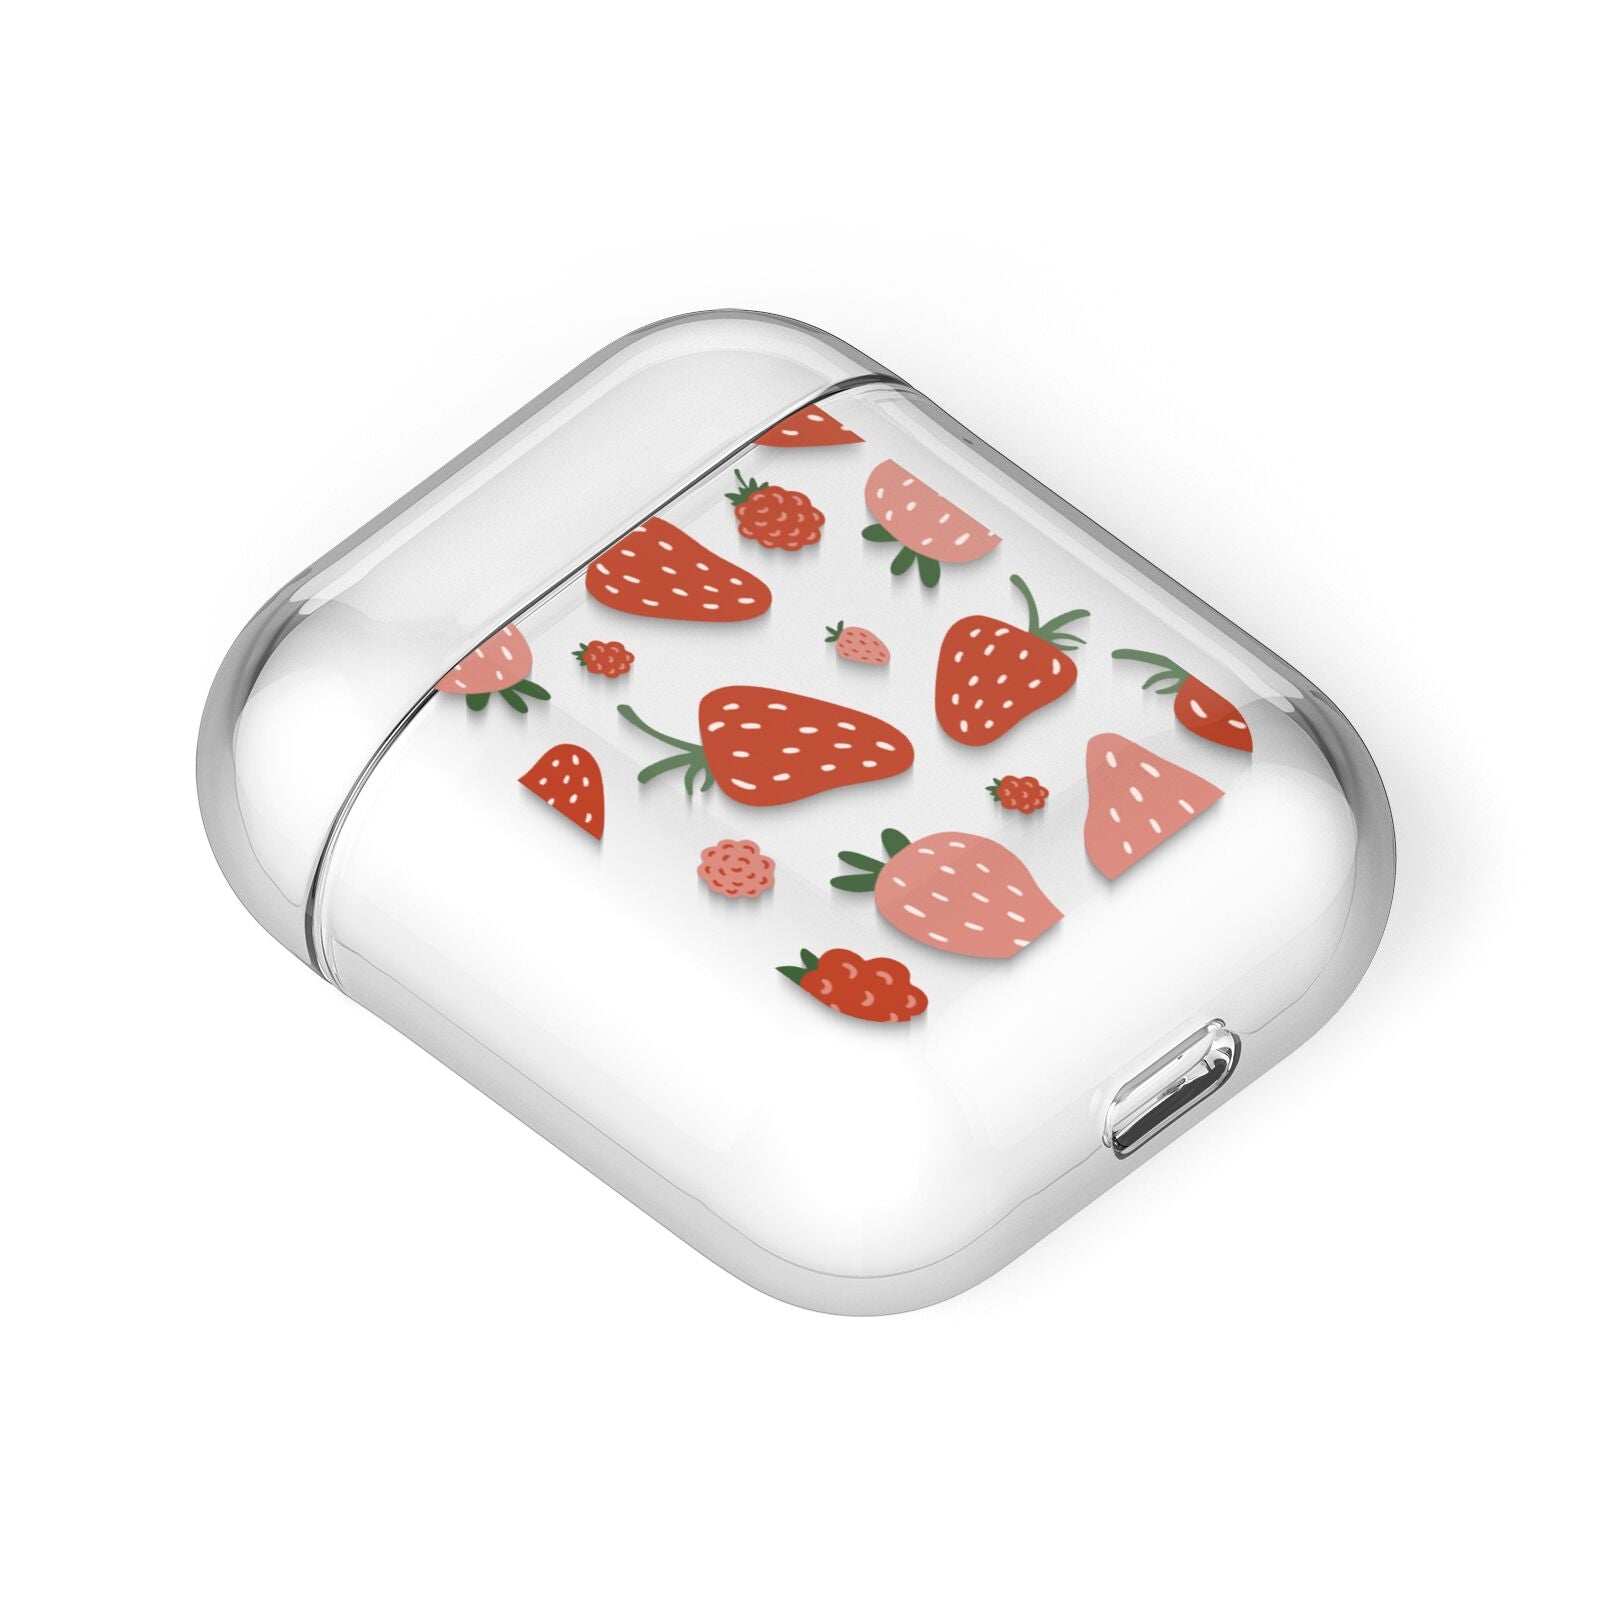 Strawberry AirPods Case Laid Flat